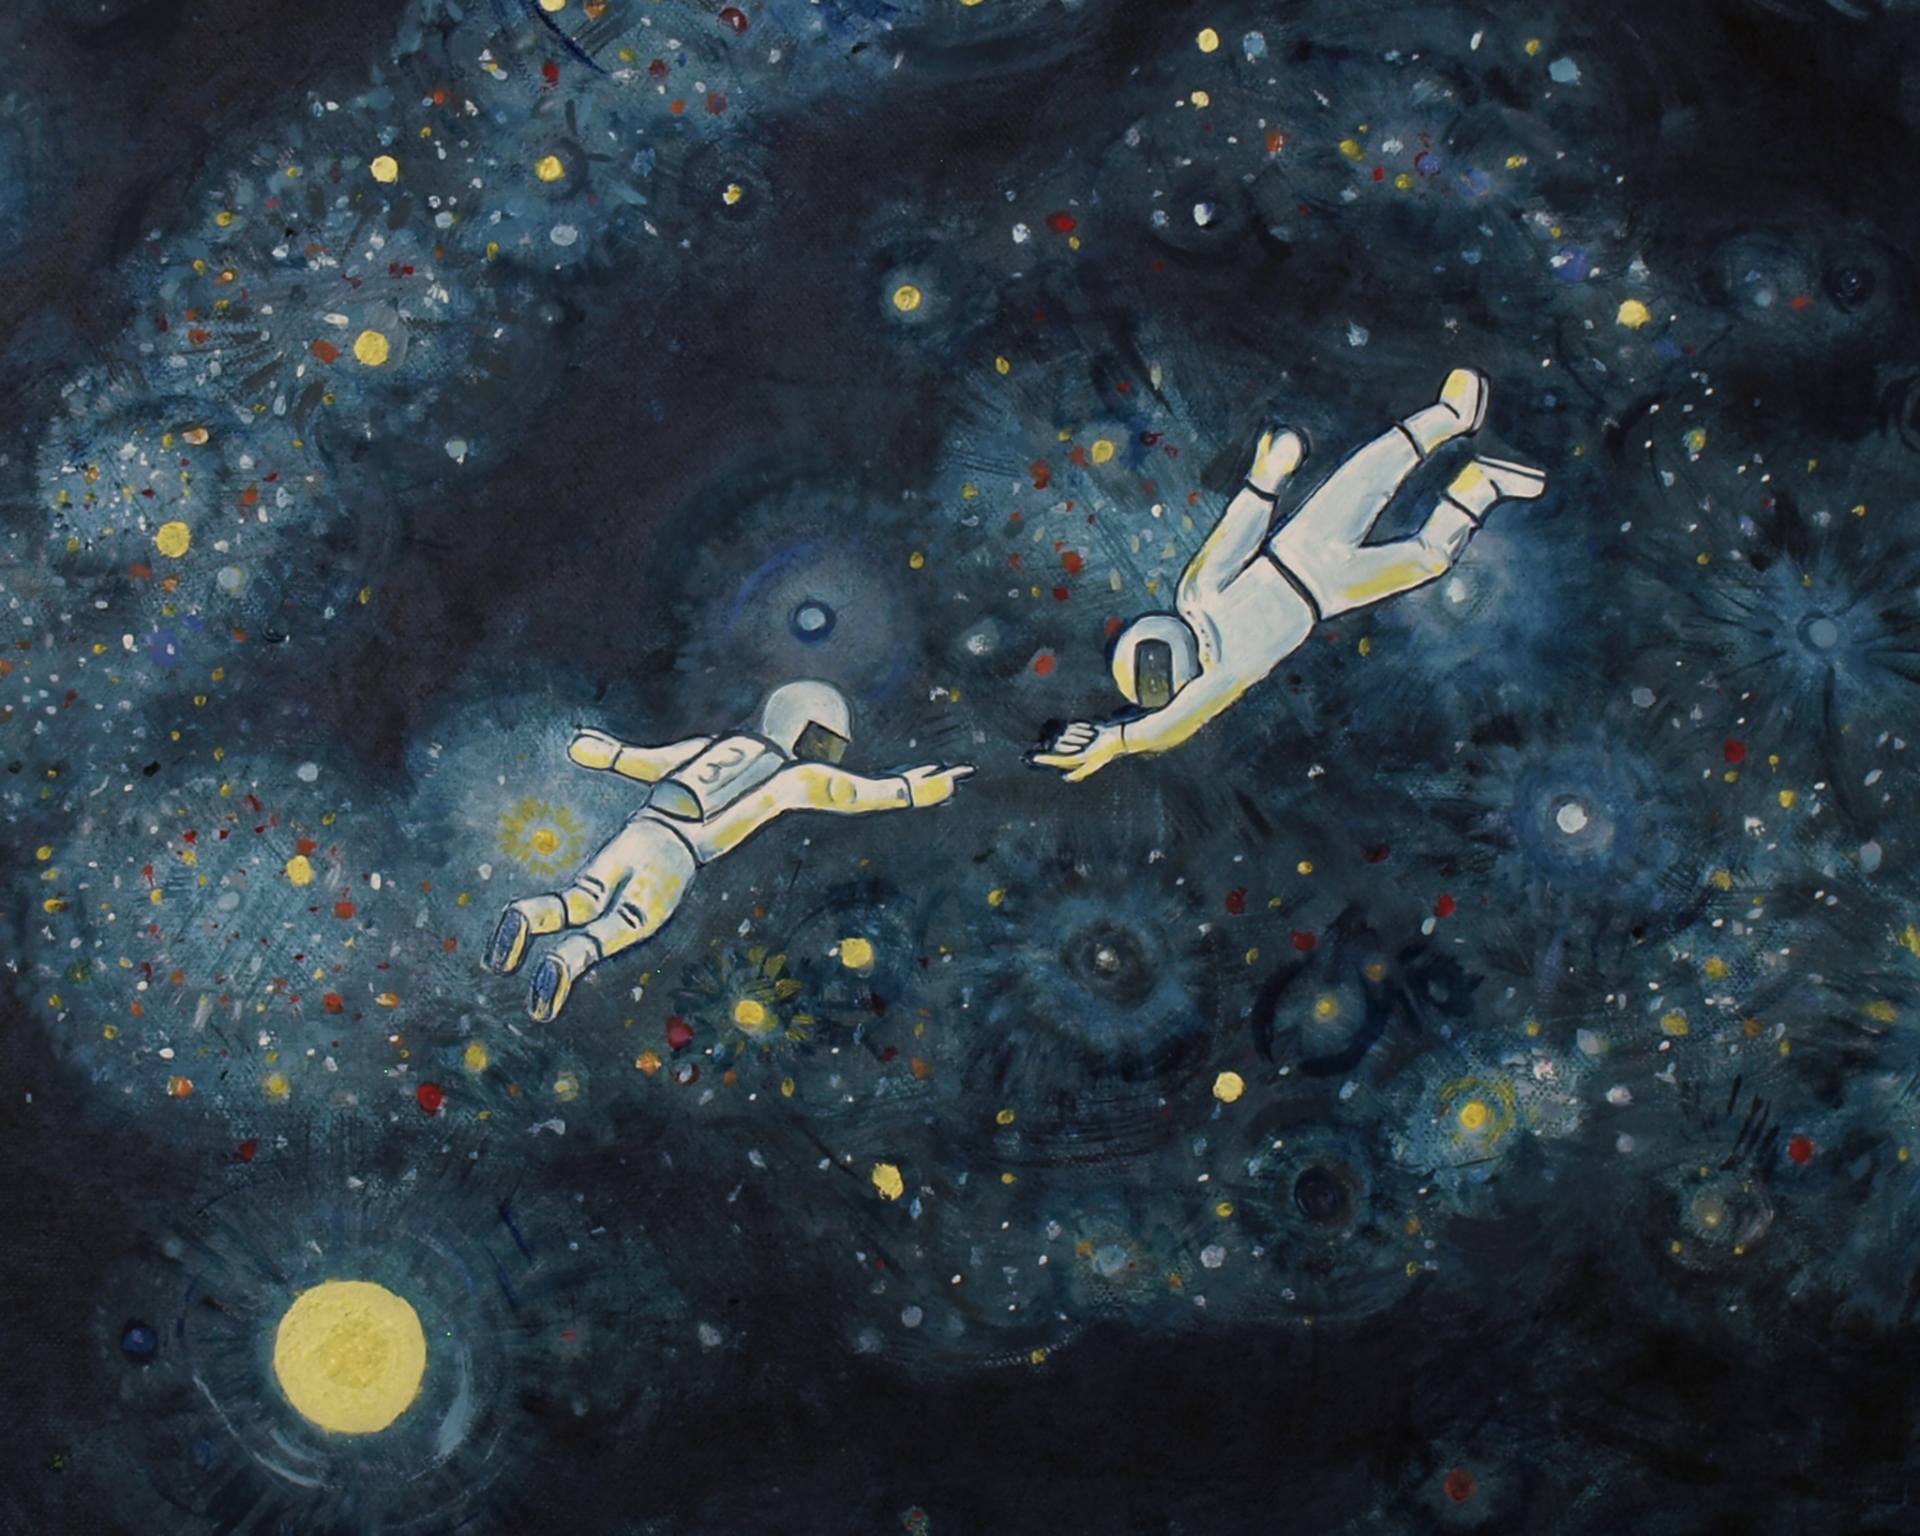 Saatchi Art: Two Astronauts Floating Above a Blue Galaxy Painting by ...